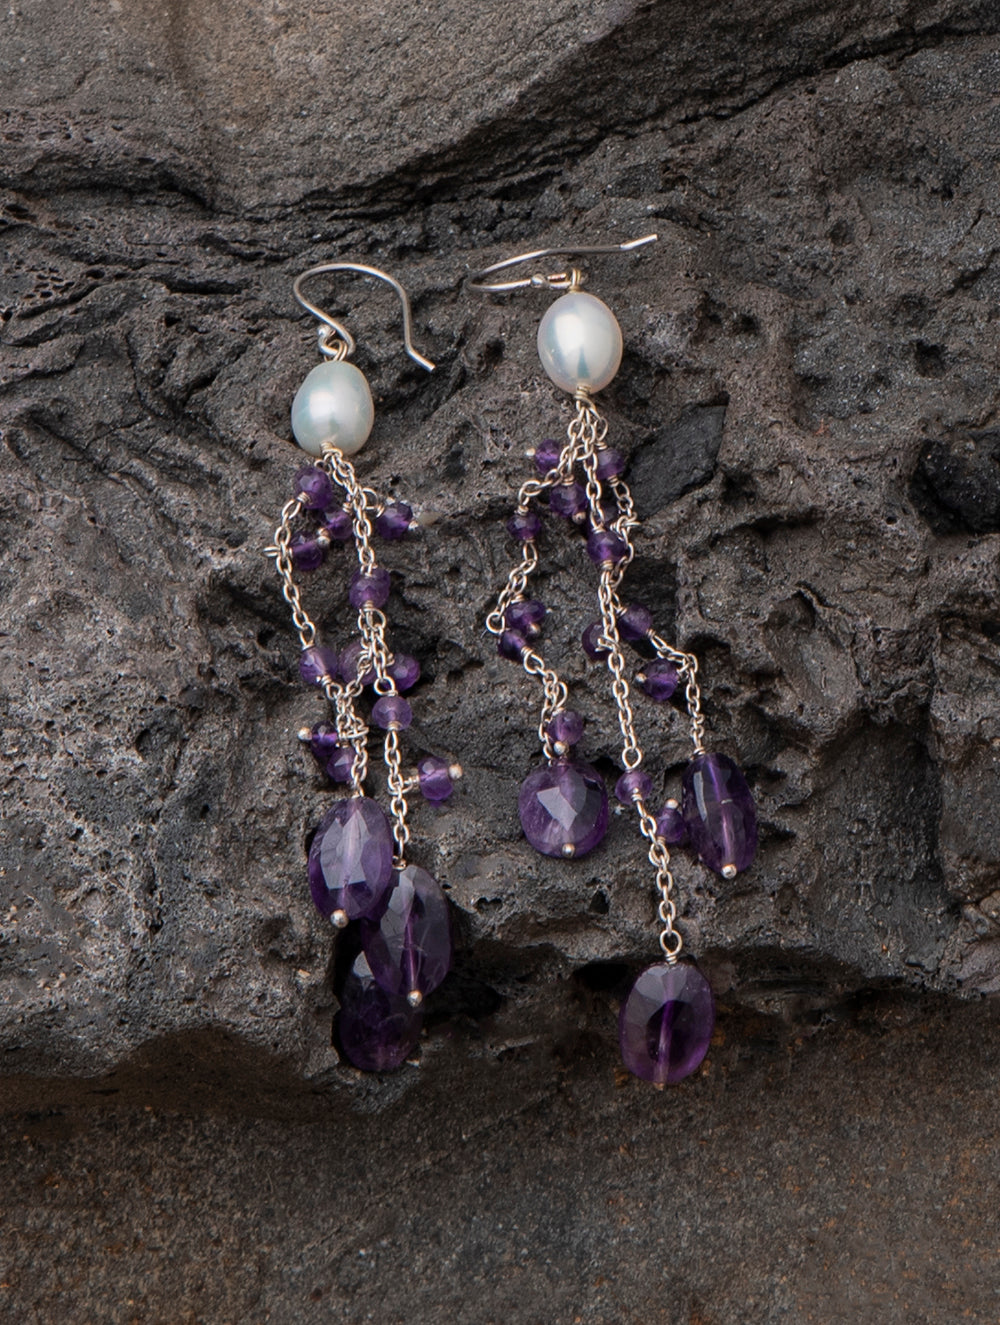 Load image into Gallery viewer, Pure Silver Earrings With Semi Precious Stones - Amethyst Delight Danglers